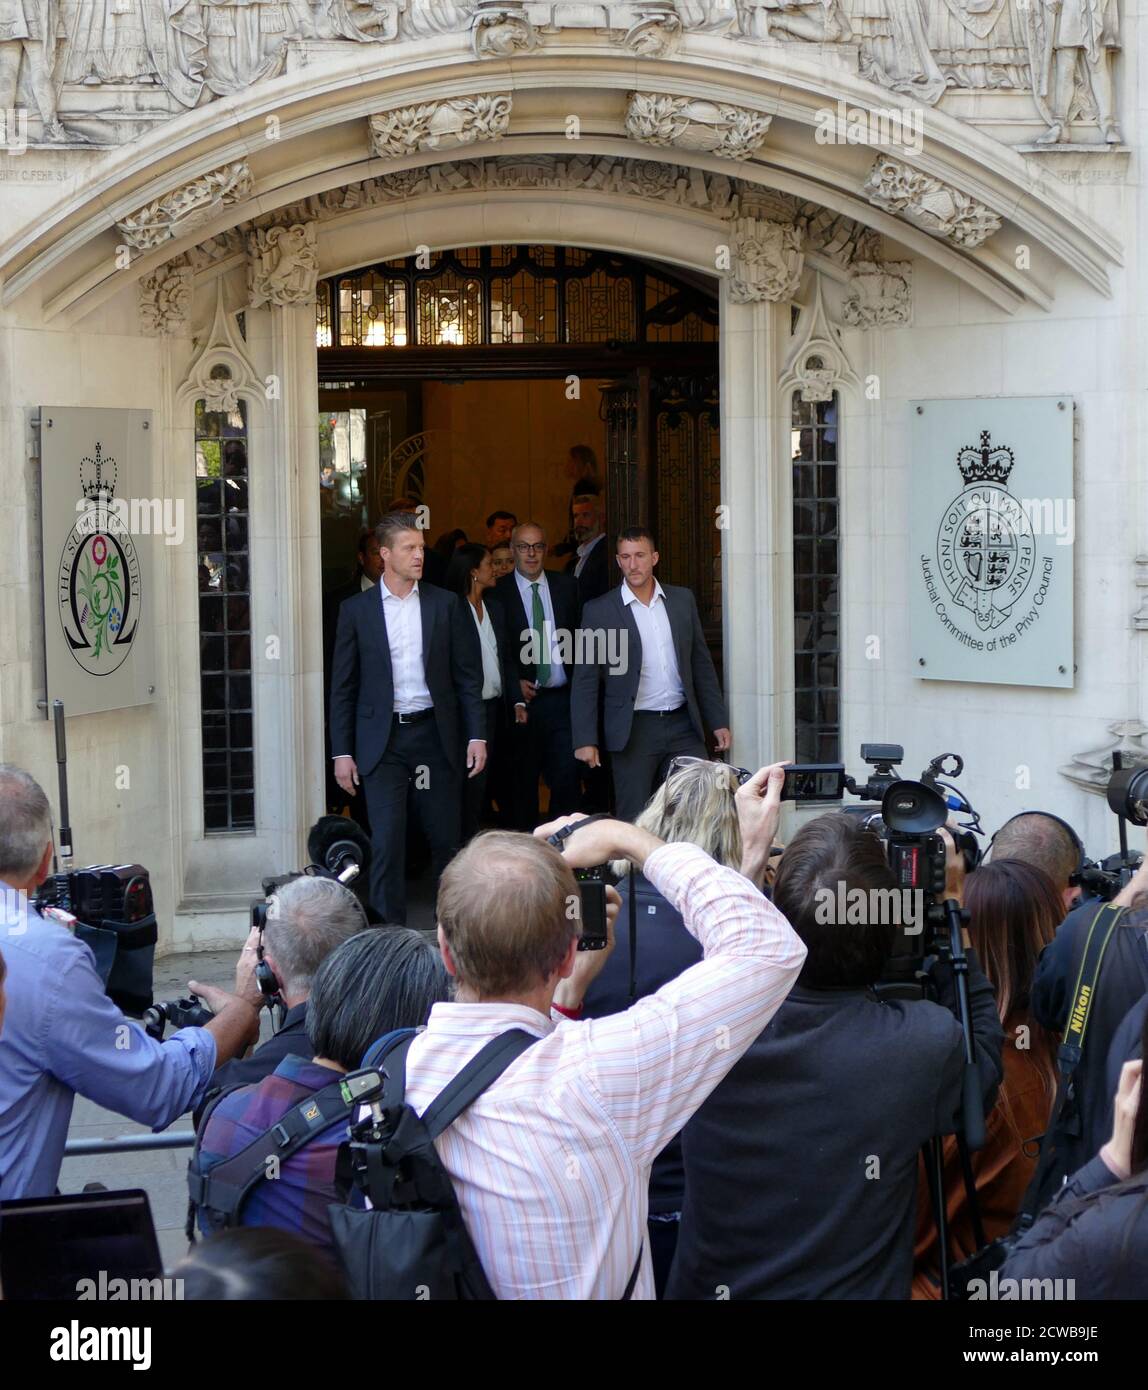 Gina Miller leaves the Supreme Court in London after day three of her challenge to the Prorogation of Parliament. 19th Sept 2019.the prorogation of the Parliament, was ordered by Queen Elizabeth II upon the advice of the Conservative Prime Minister, Boris Johnson, on 28 August 2019. opposition politicians saw this as an unconstitutional attempt to reduce parliamentary scrutiny of the Government's Brexit plan. Gina Nadira Miller is a Guyanese-British business owner and activist who initiated the 2016 R v Secretary of State for Exiting the European Union court case against the British government Stock Photo